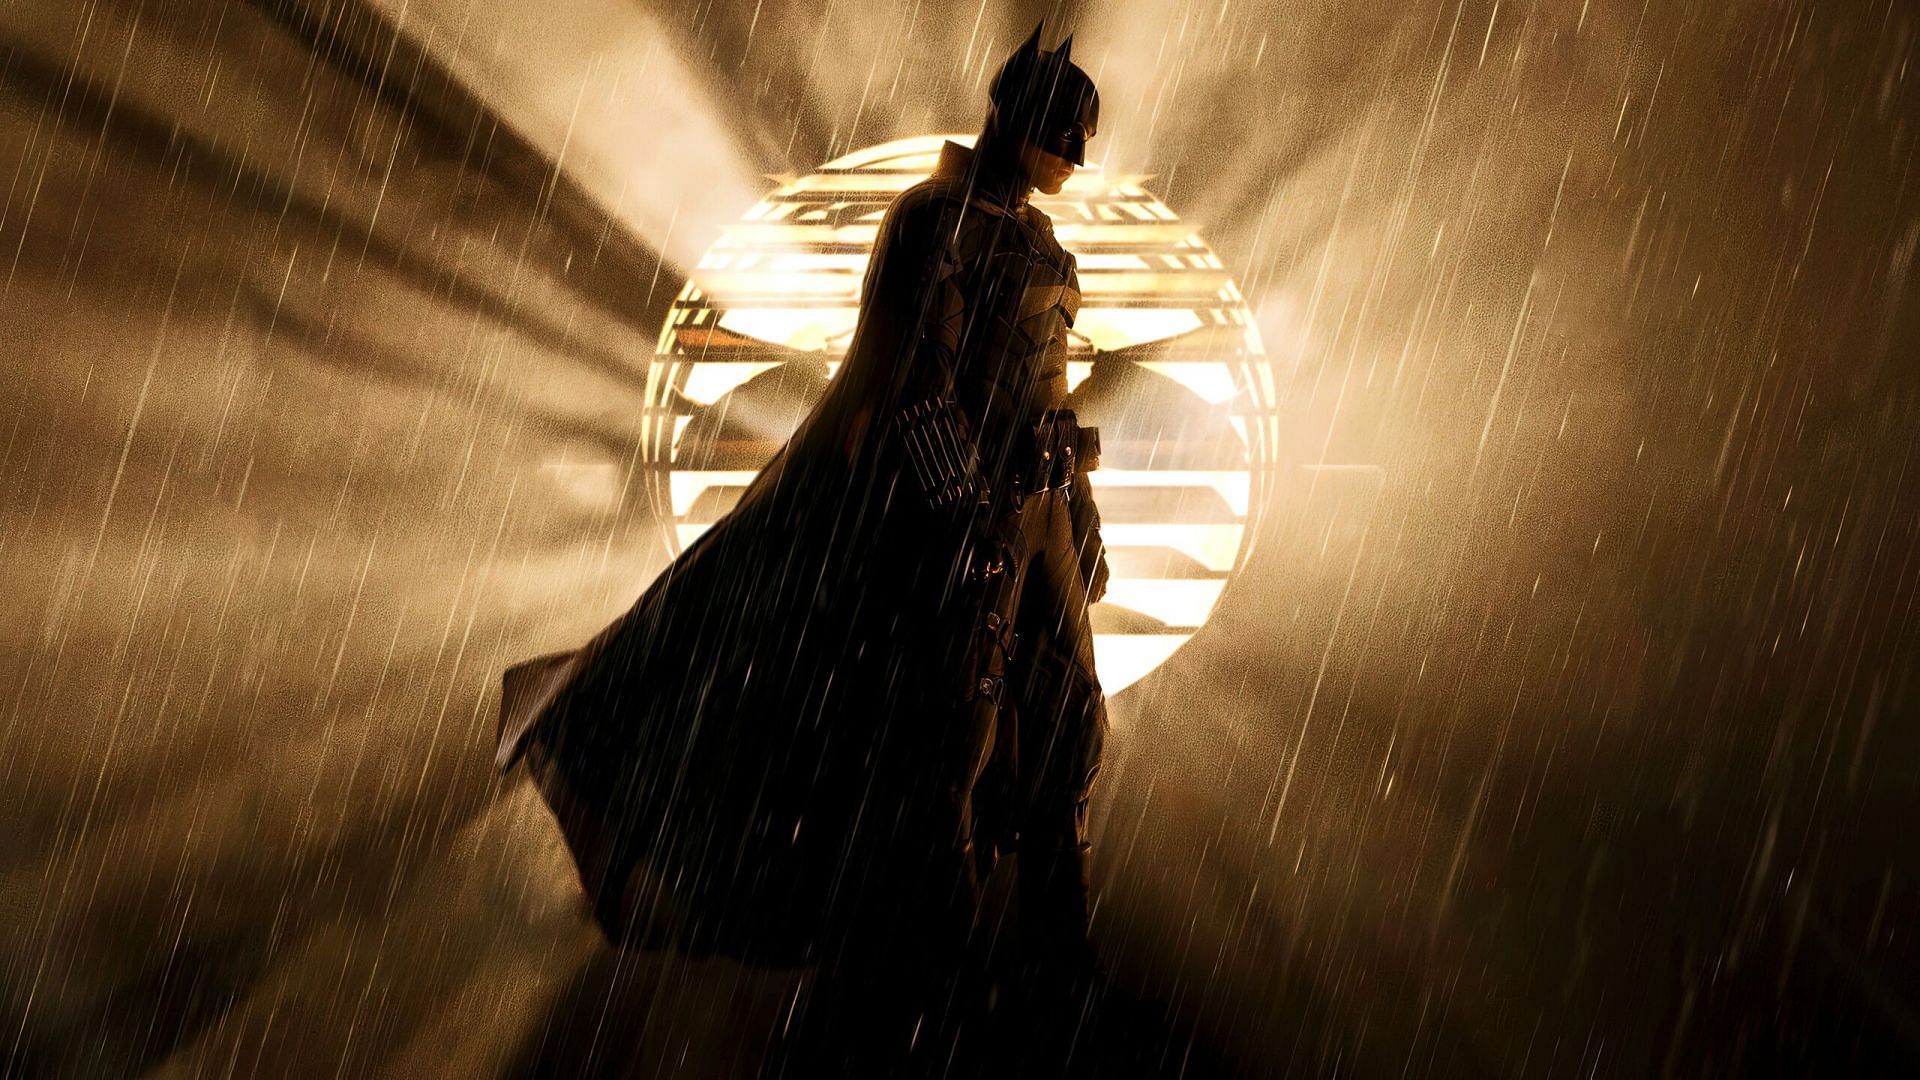 The role of the Bat-Signal in the Batman's psyche